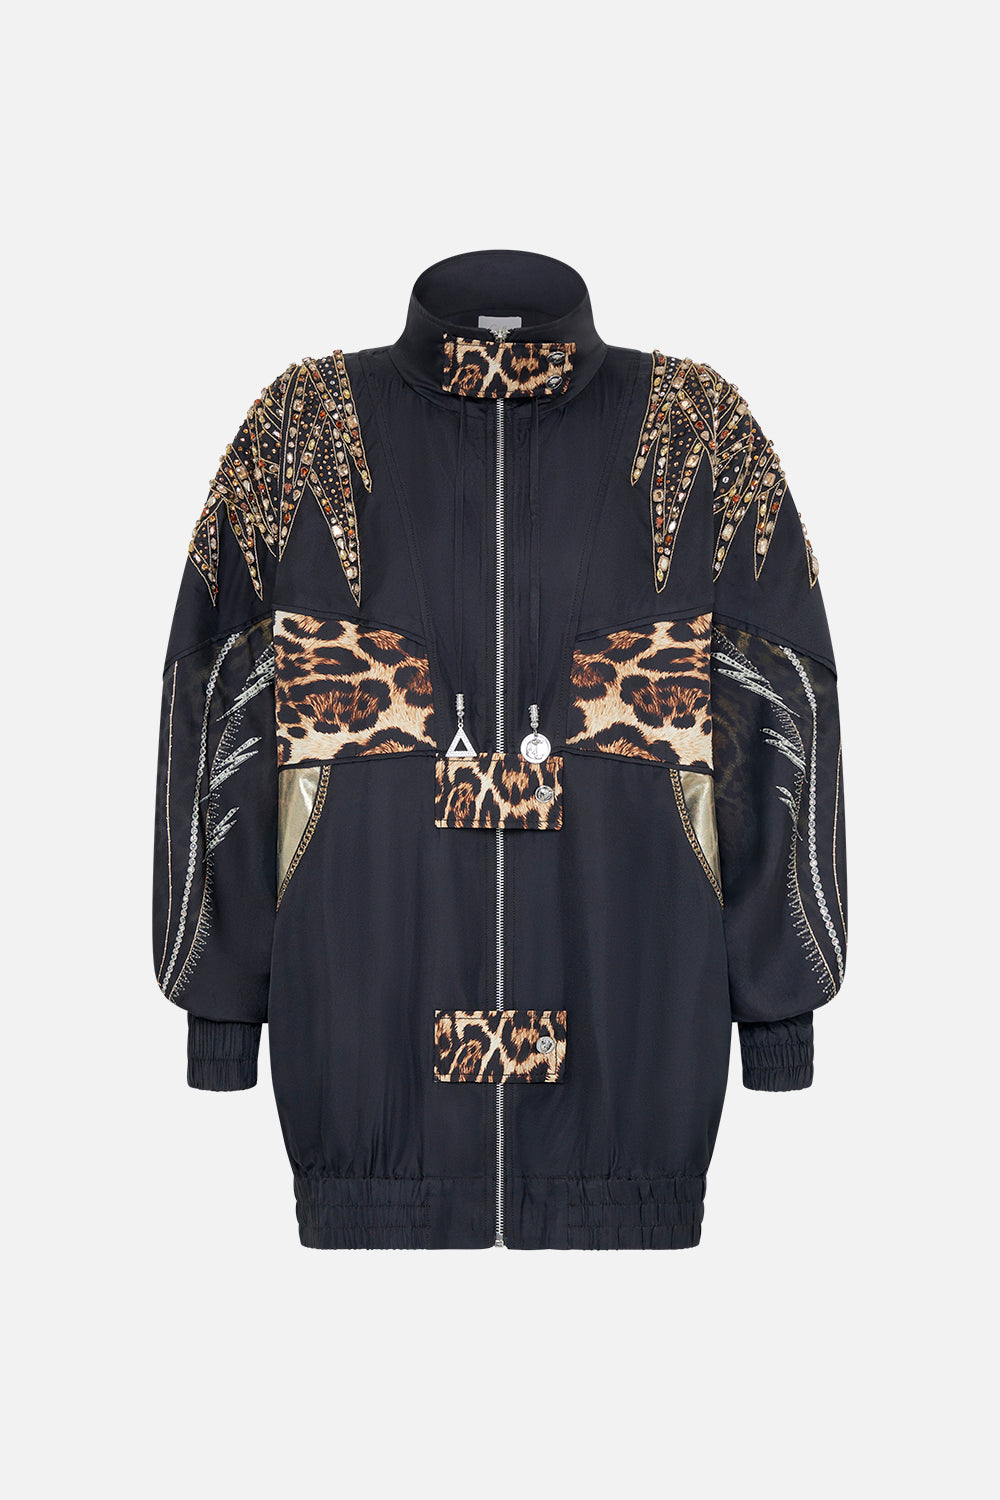 Product view of CAMILLA animal print jacket in Chaos In The Cosmos print